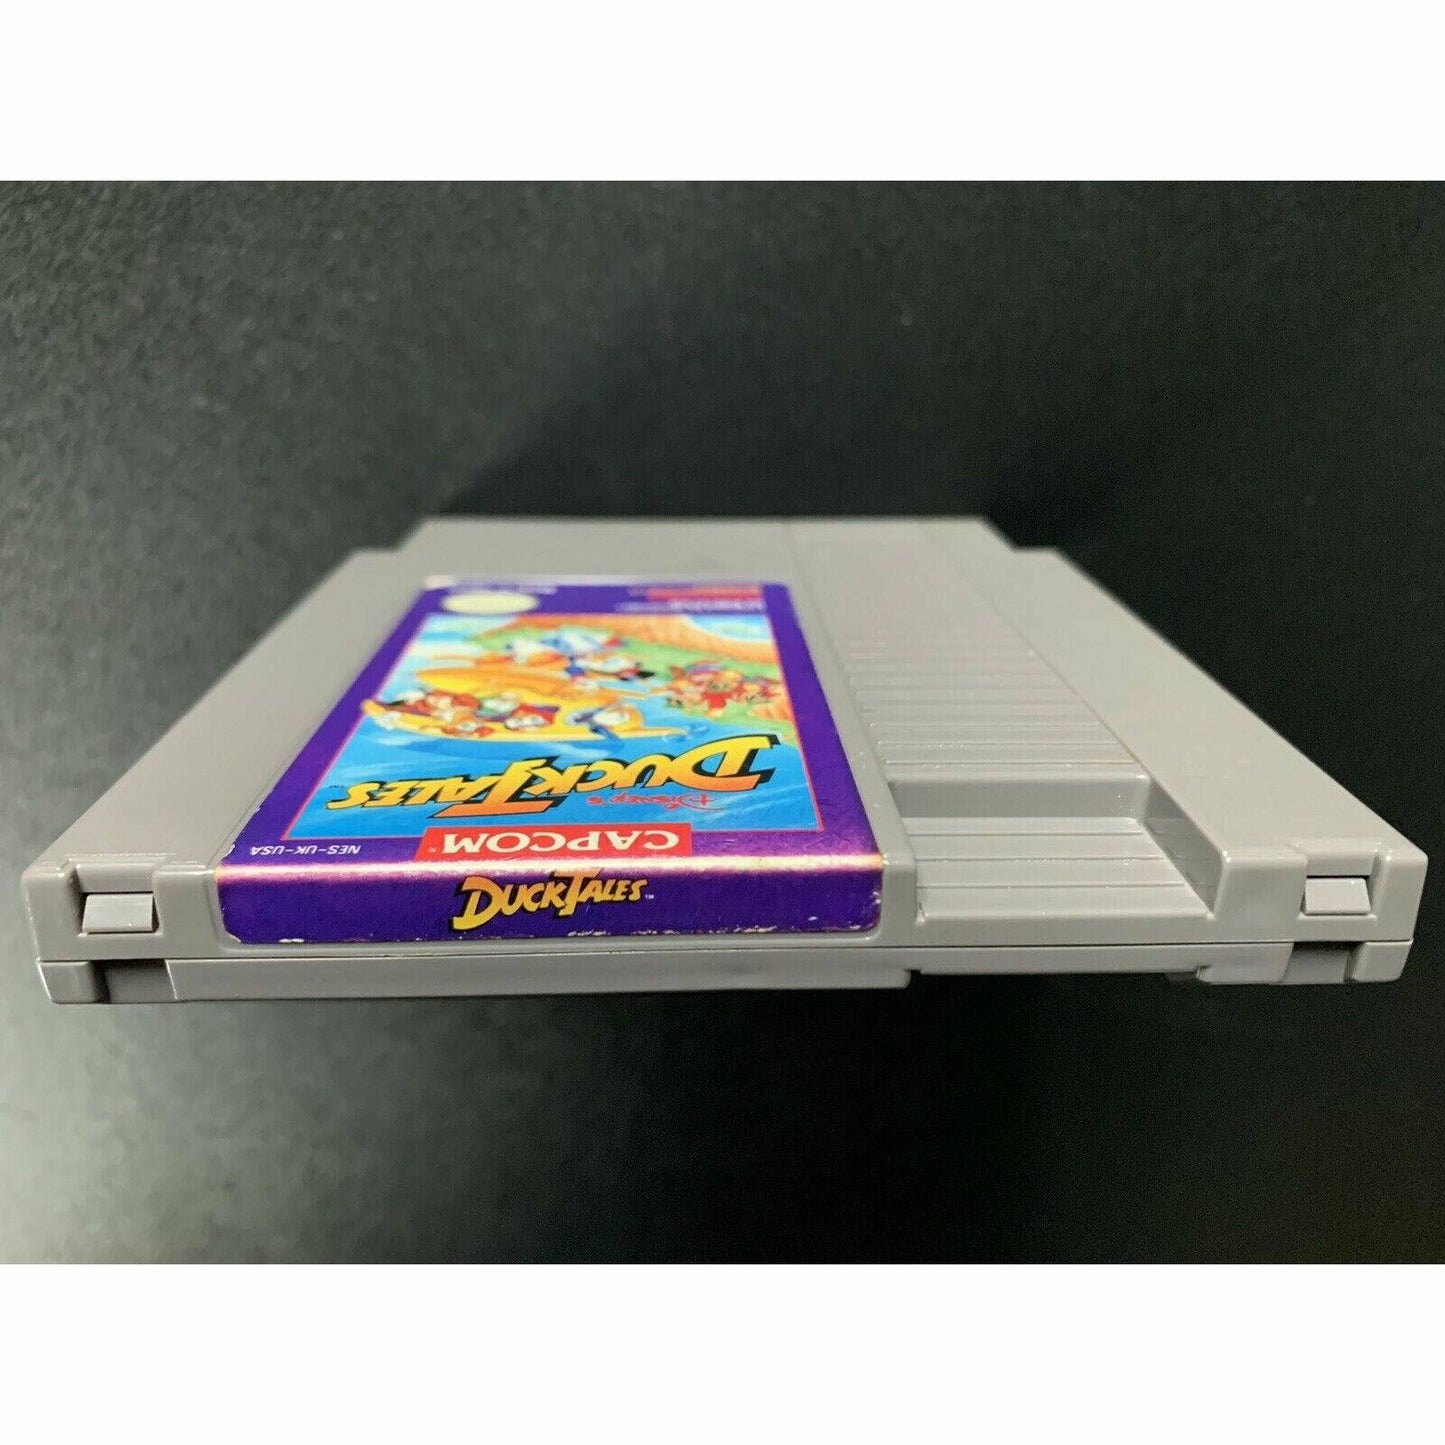 Duck Tales with Bitbox Case - NES